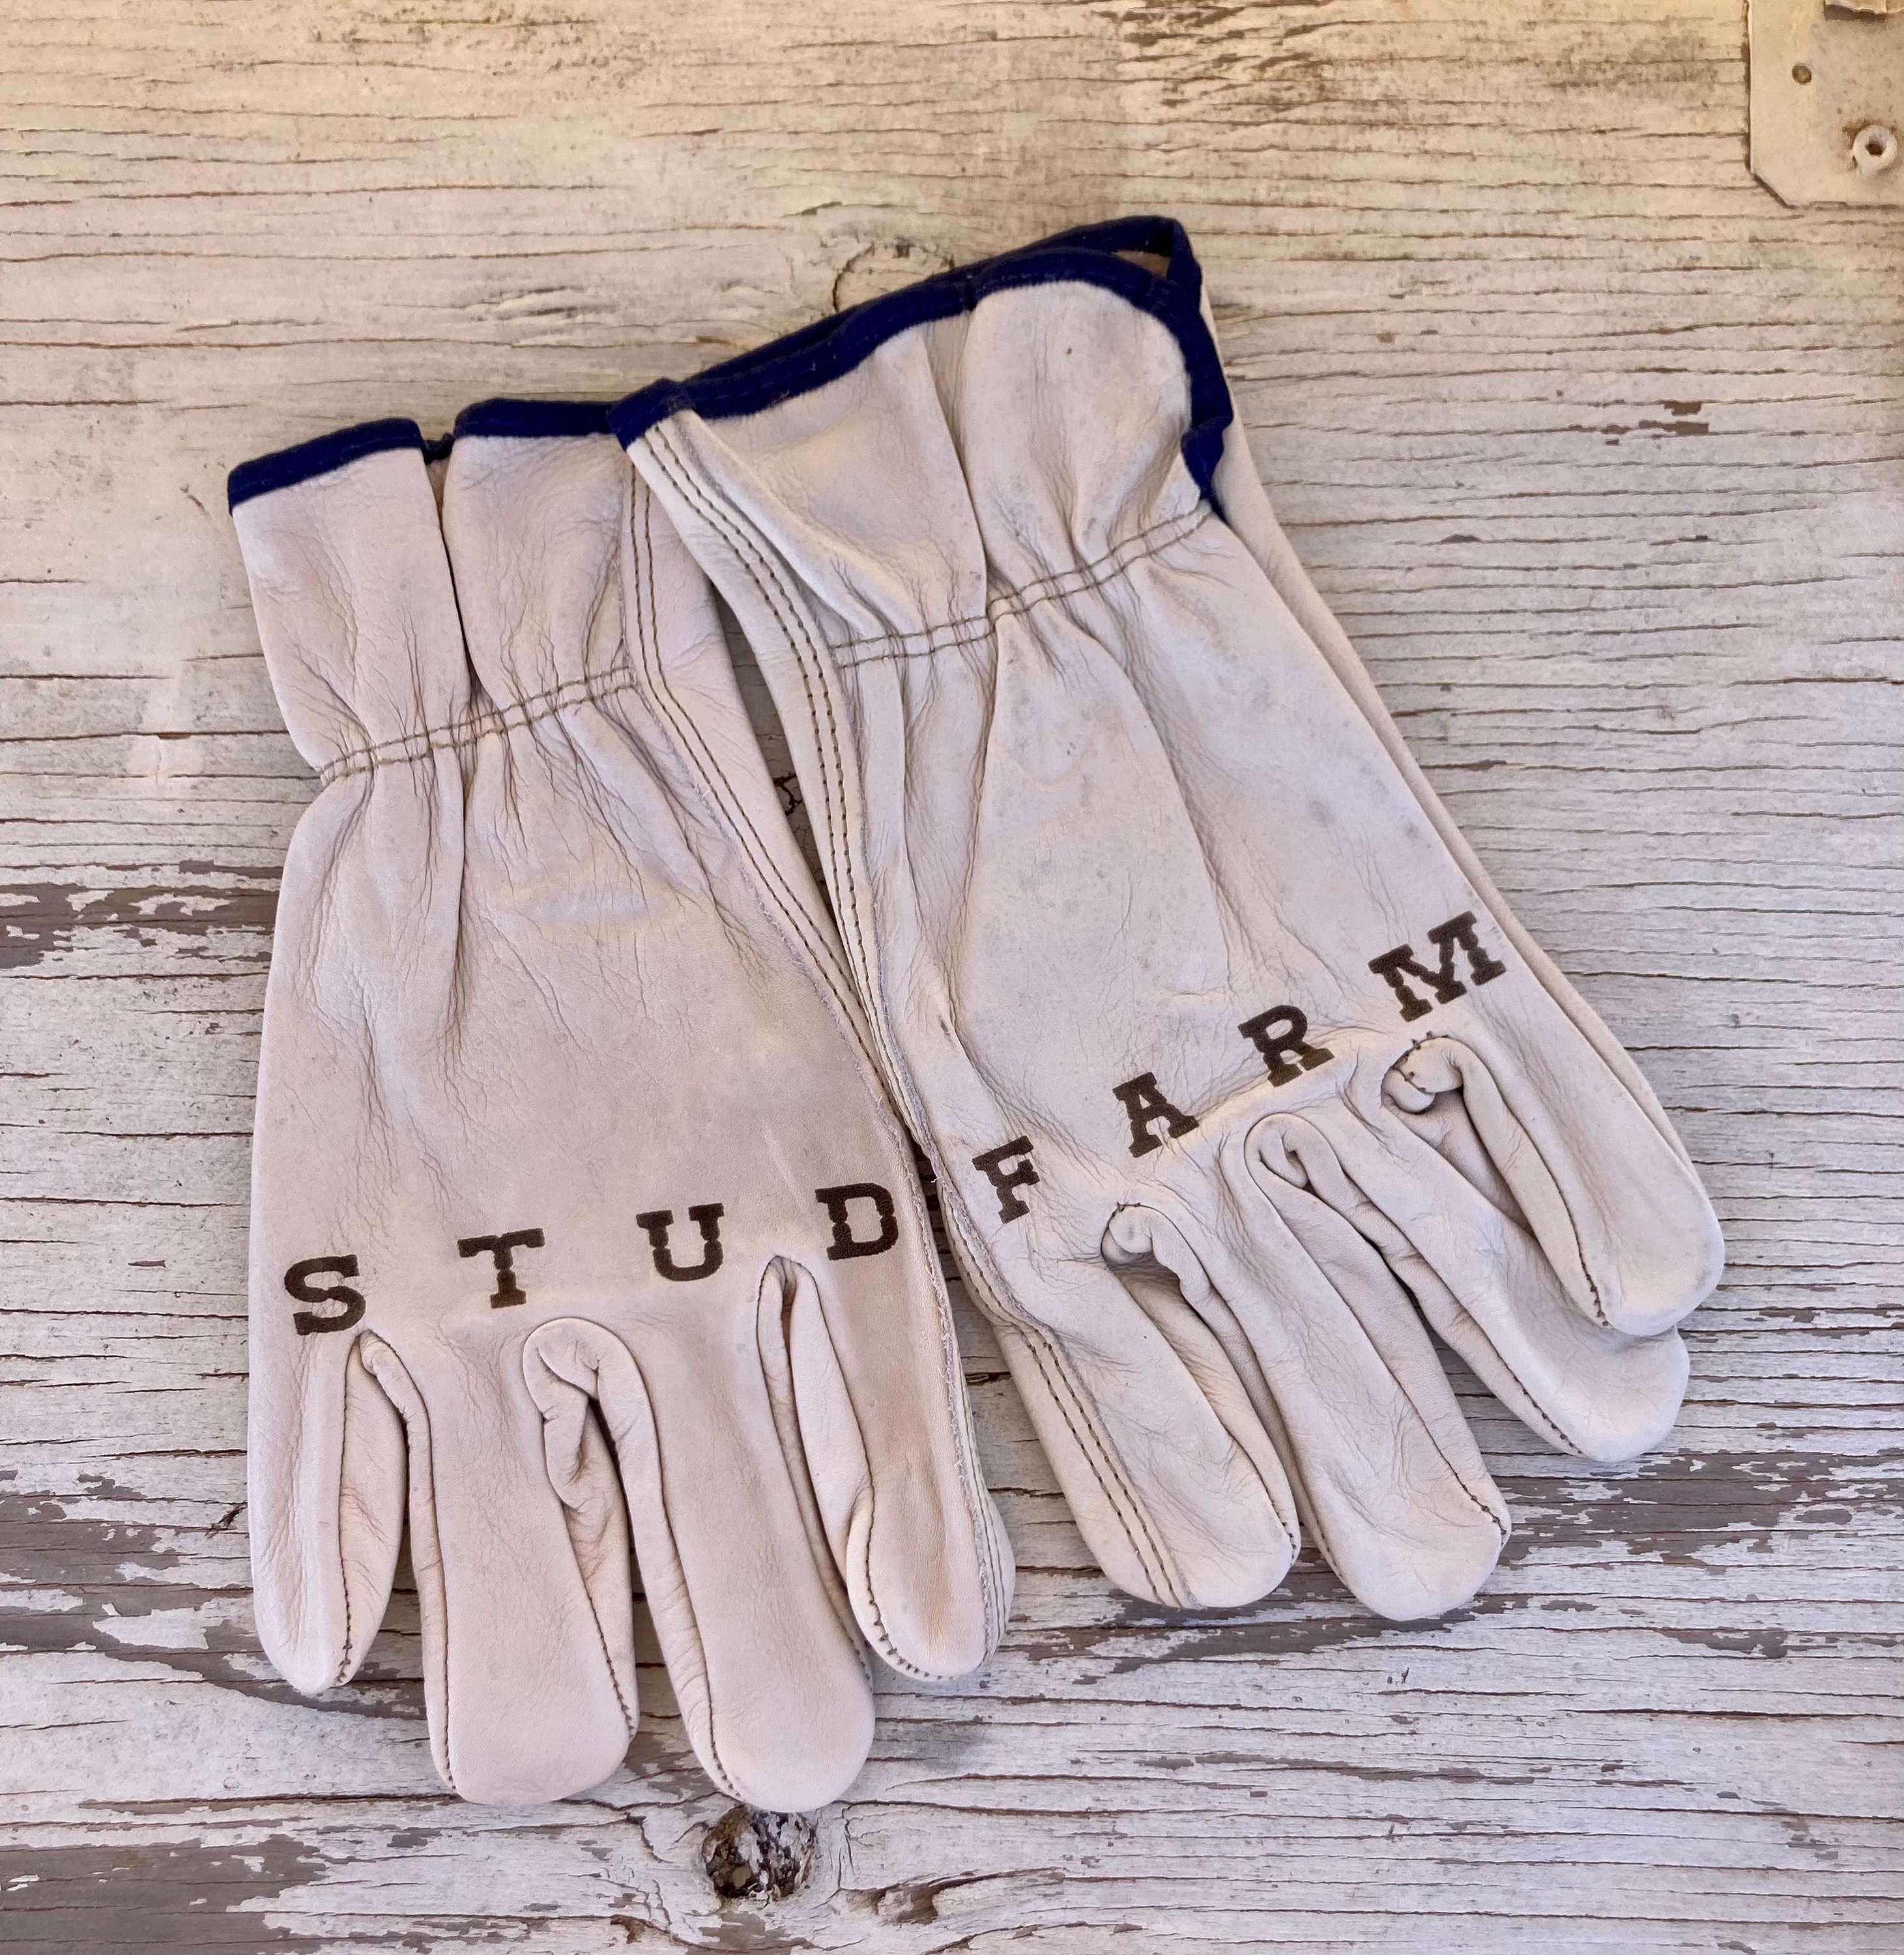 Personalized Leather Gloves, Grain Pigskin Leather brand FIRM GRIP Work  Gloves, Gift Daddy, Construction Gloves, Work Outdoor Men's 